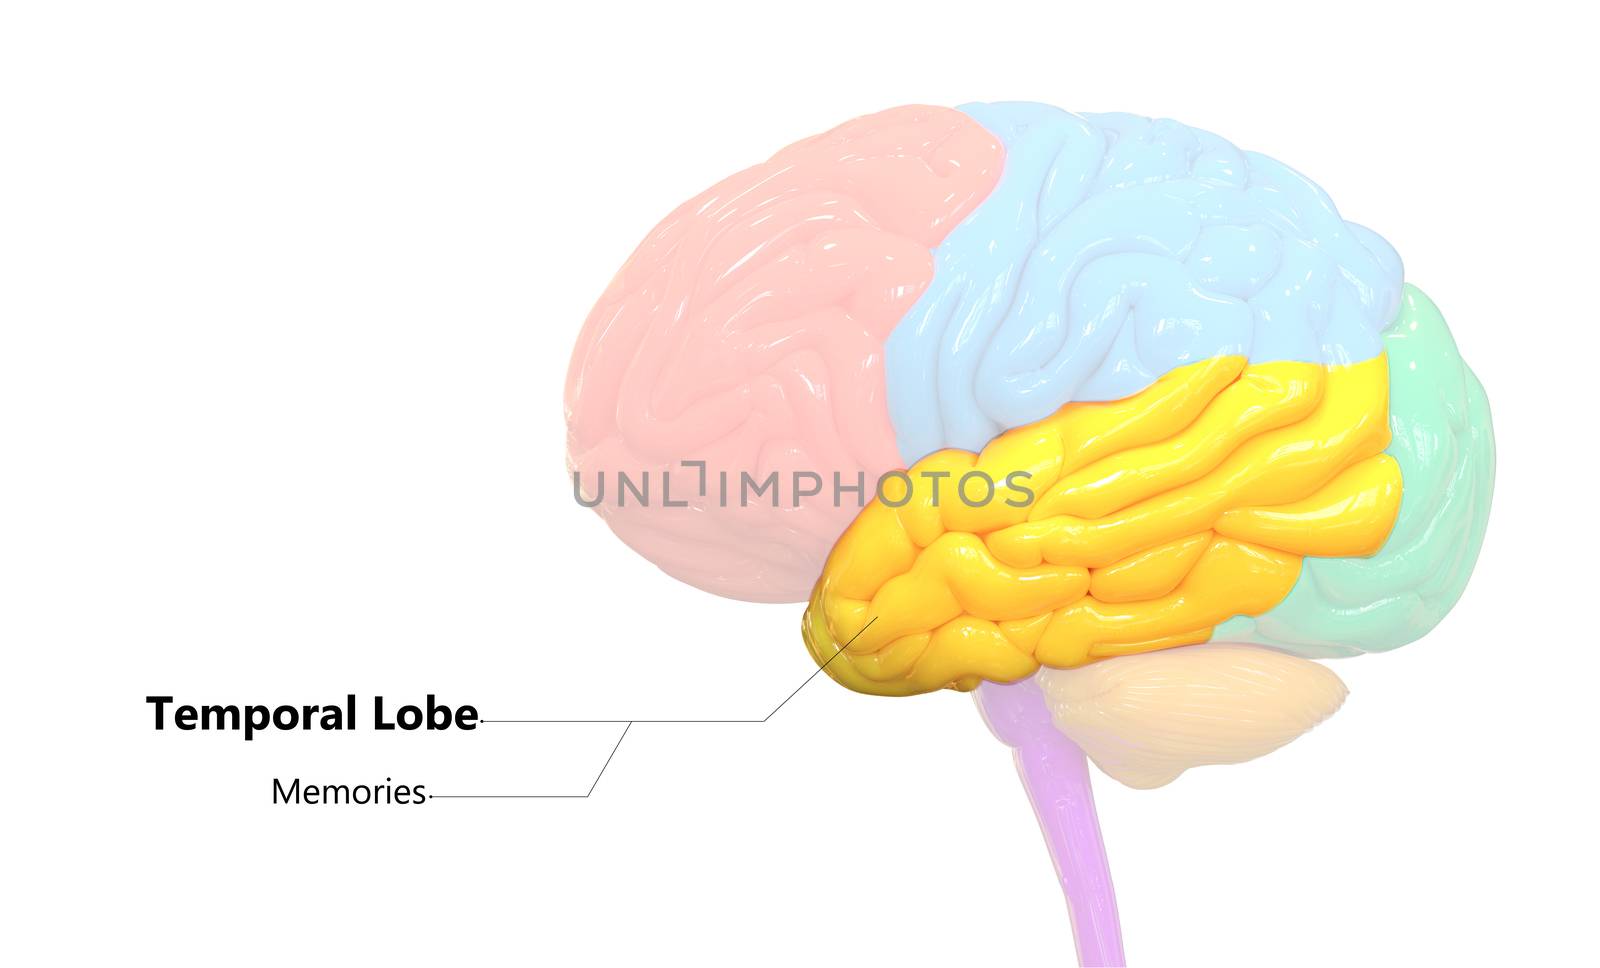 Central Organ of Human Nervous System Brain Lobes Temporal Lobe Described with Labels Anatomy by magicmine